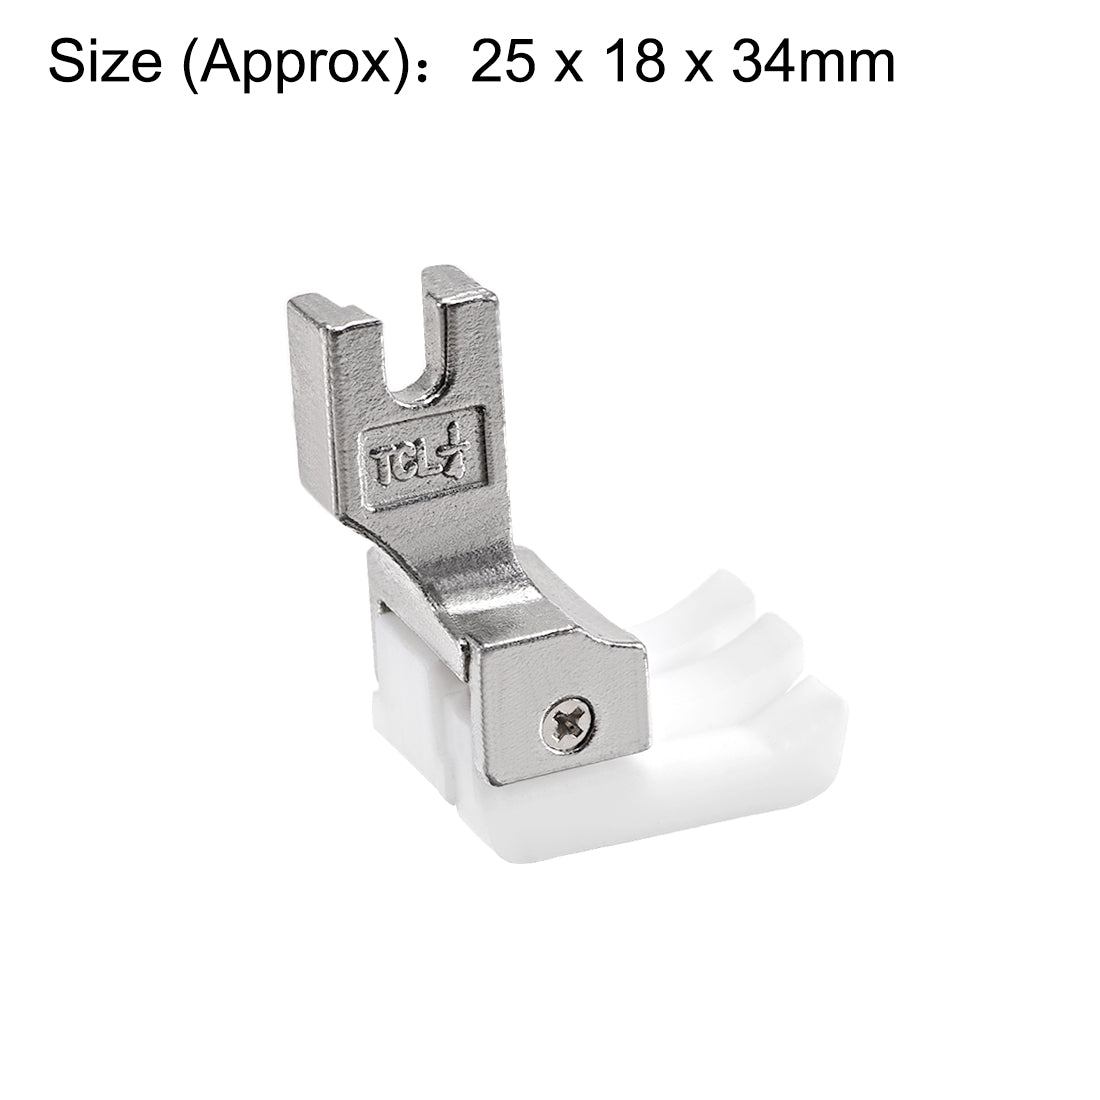 Uxcell Uxcell 1/32" Left Side Edge Guide Compensating Presser Foot for Single Needle Industrial Sewing Machines